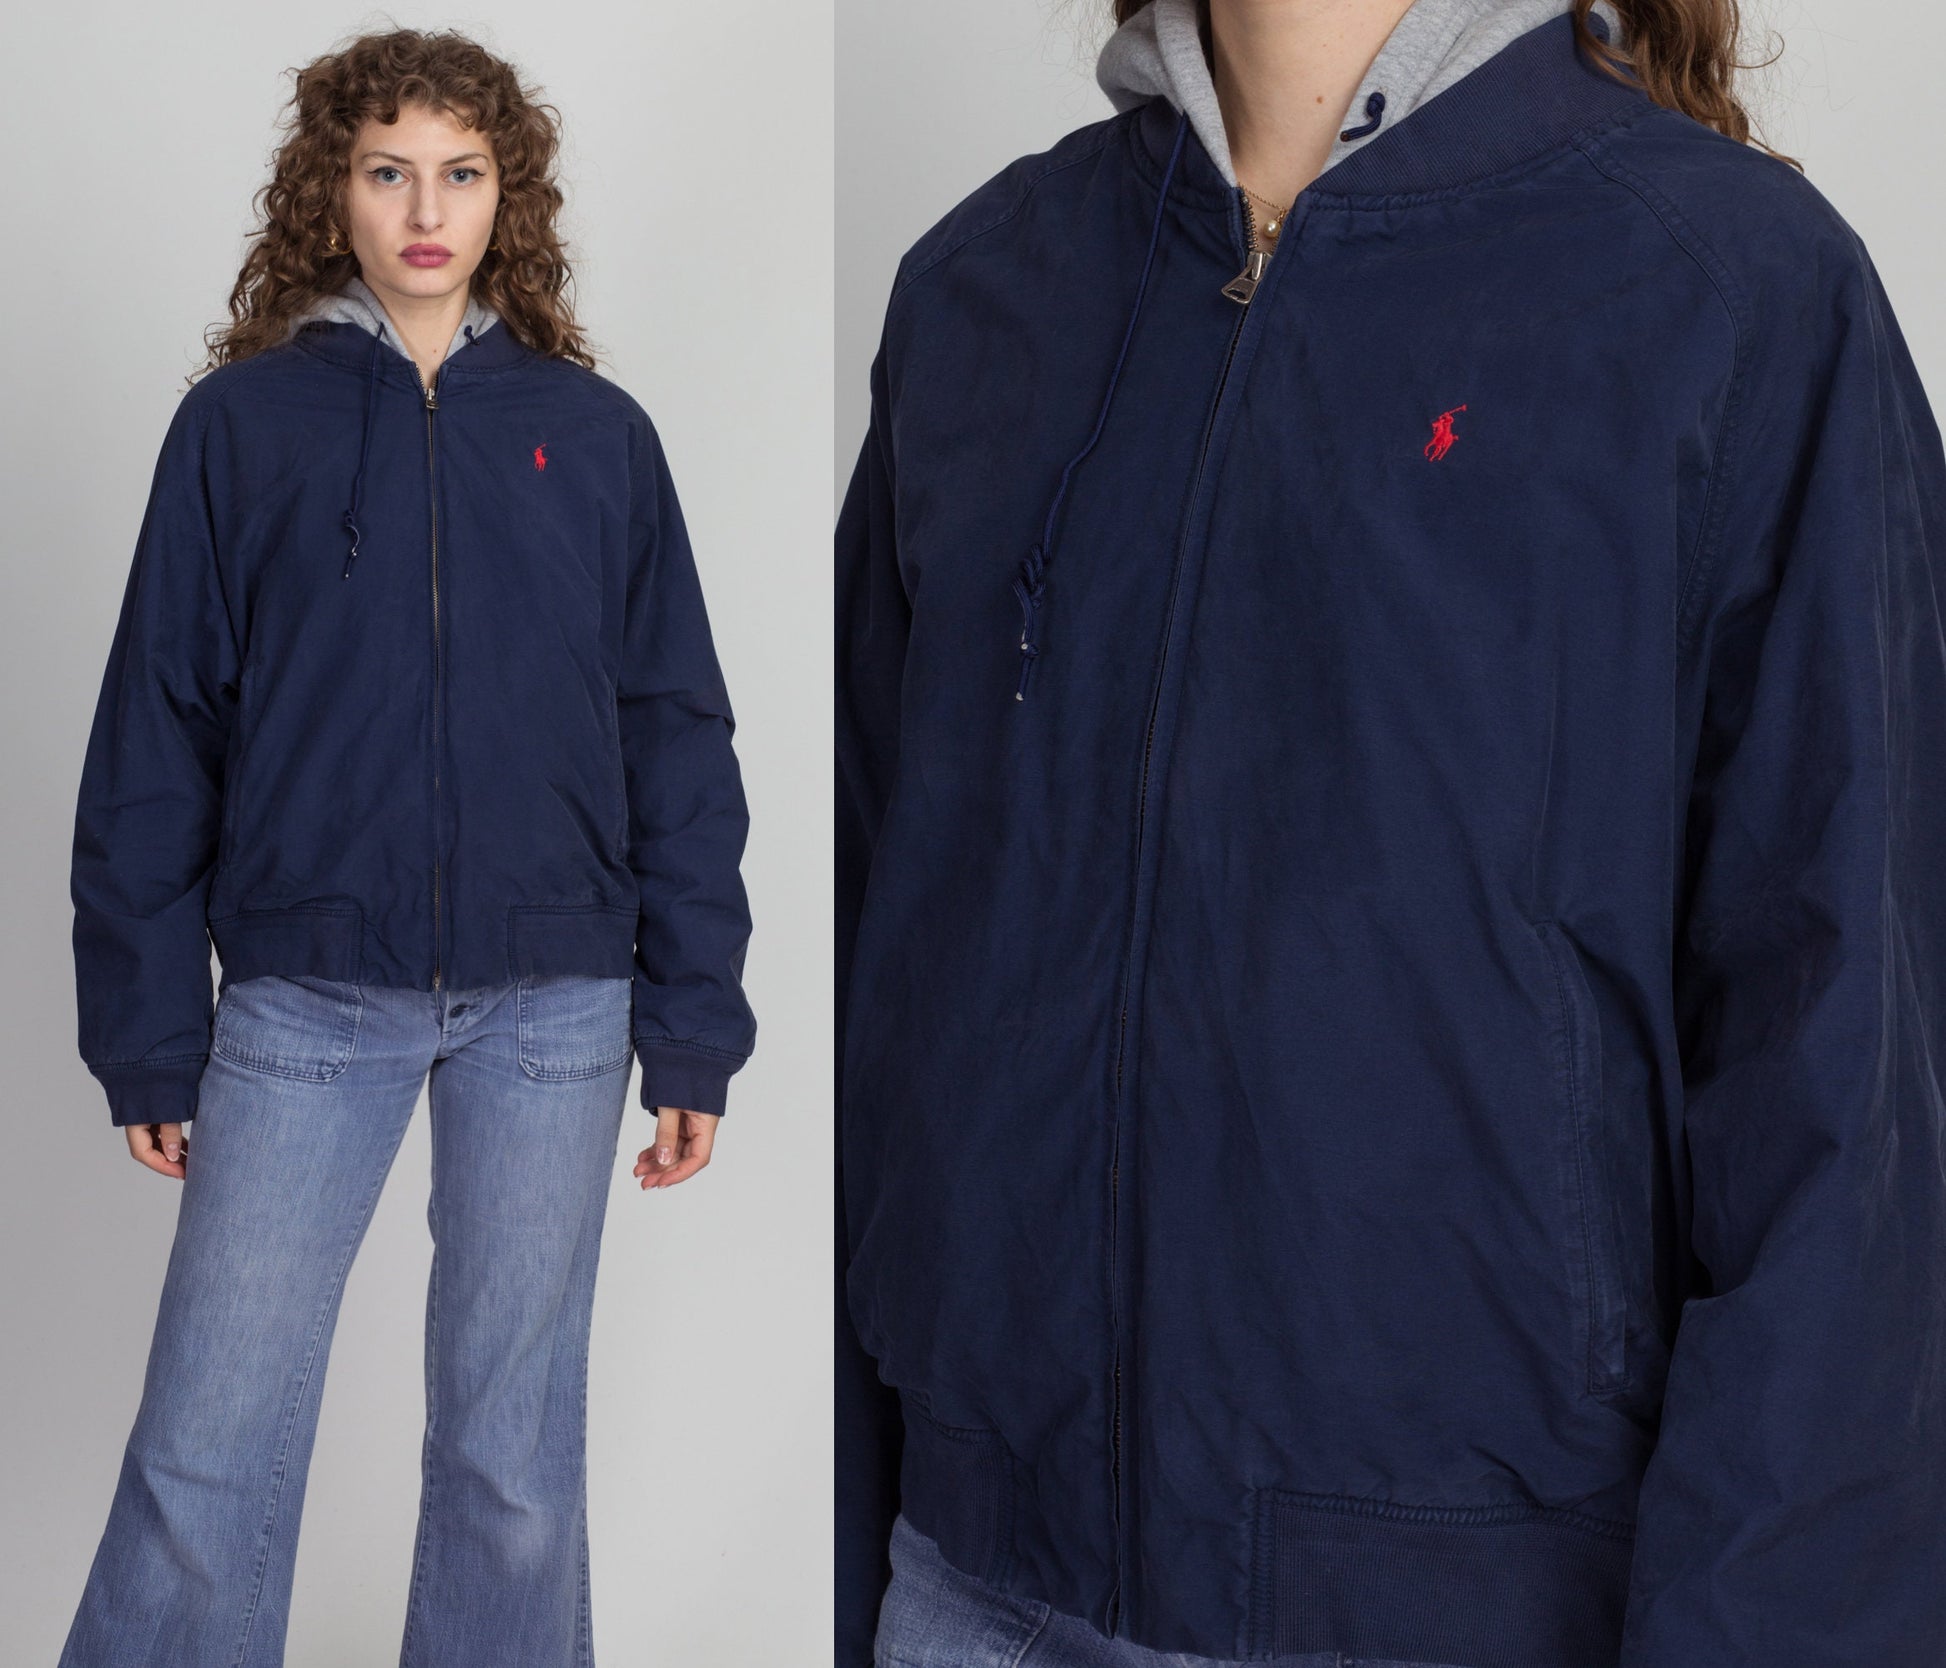 Ralph Lauren - Inspired by our iconic early '90s